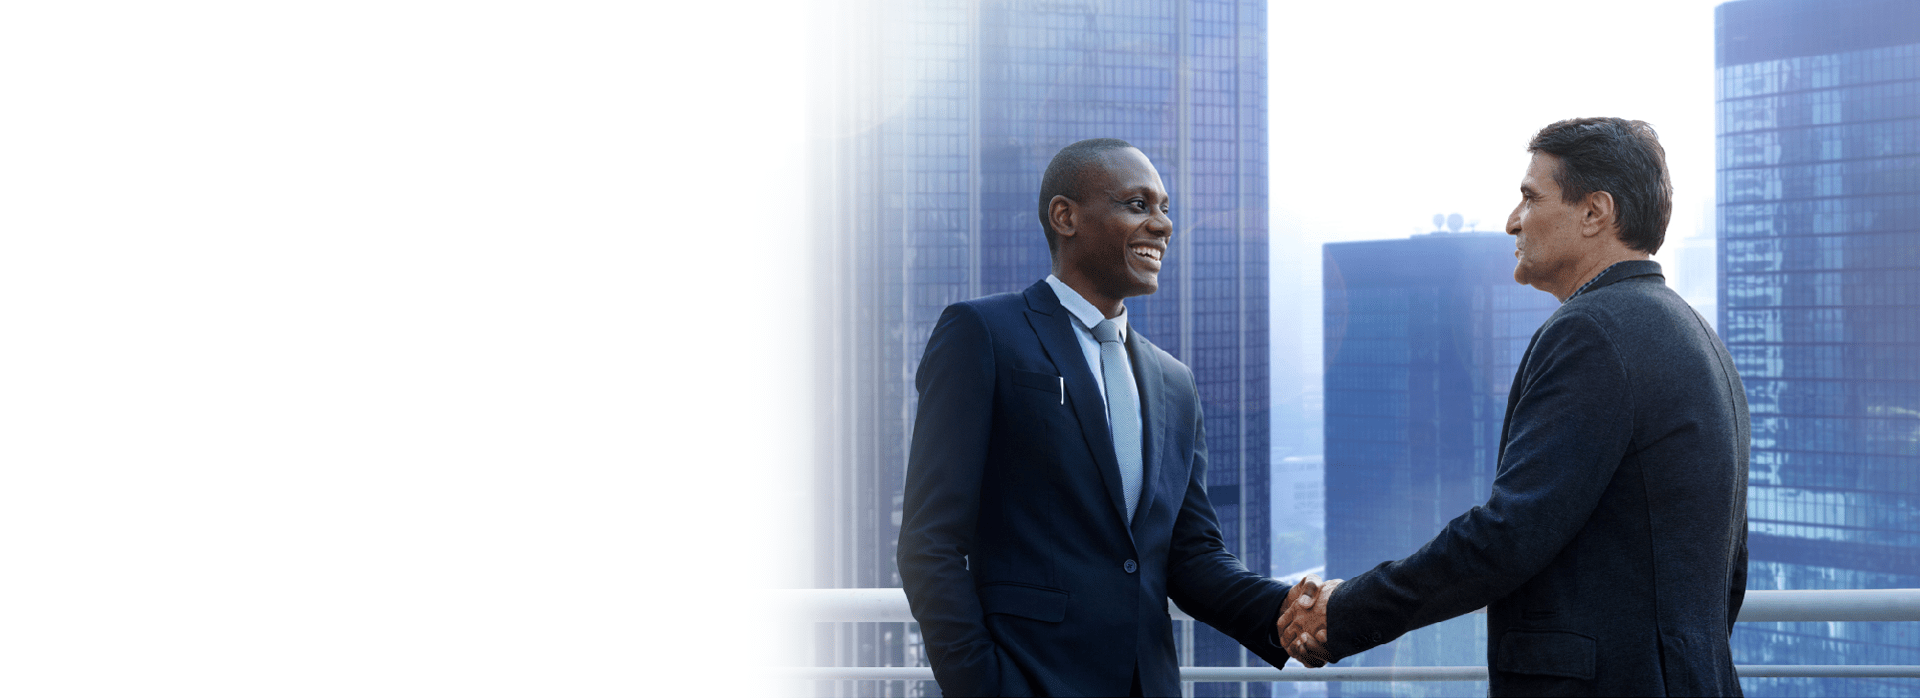 two men in suits shaking hands atop building